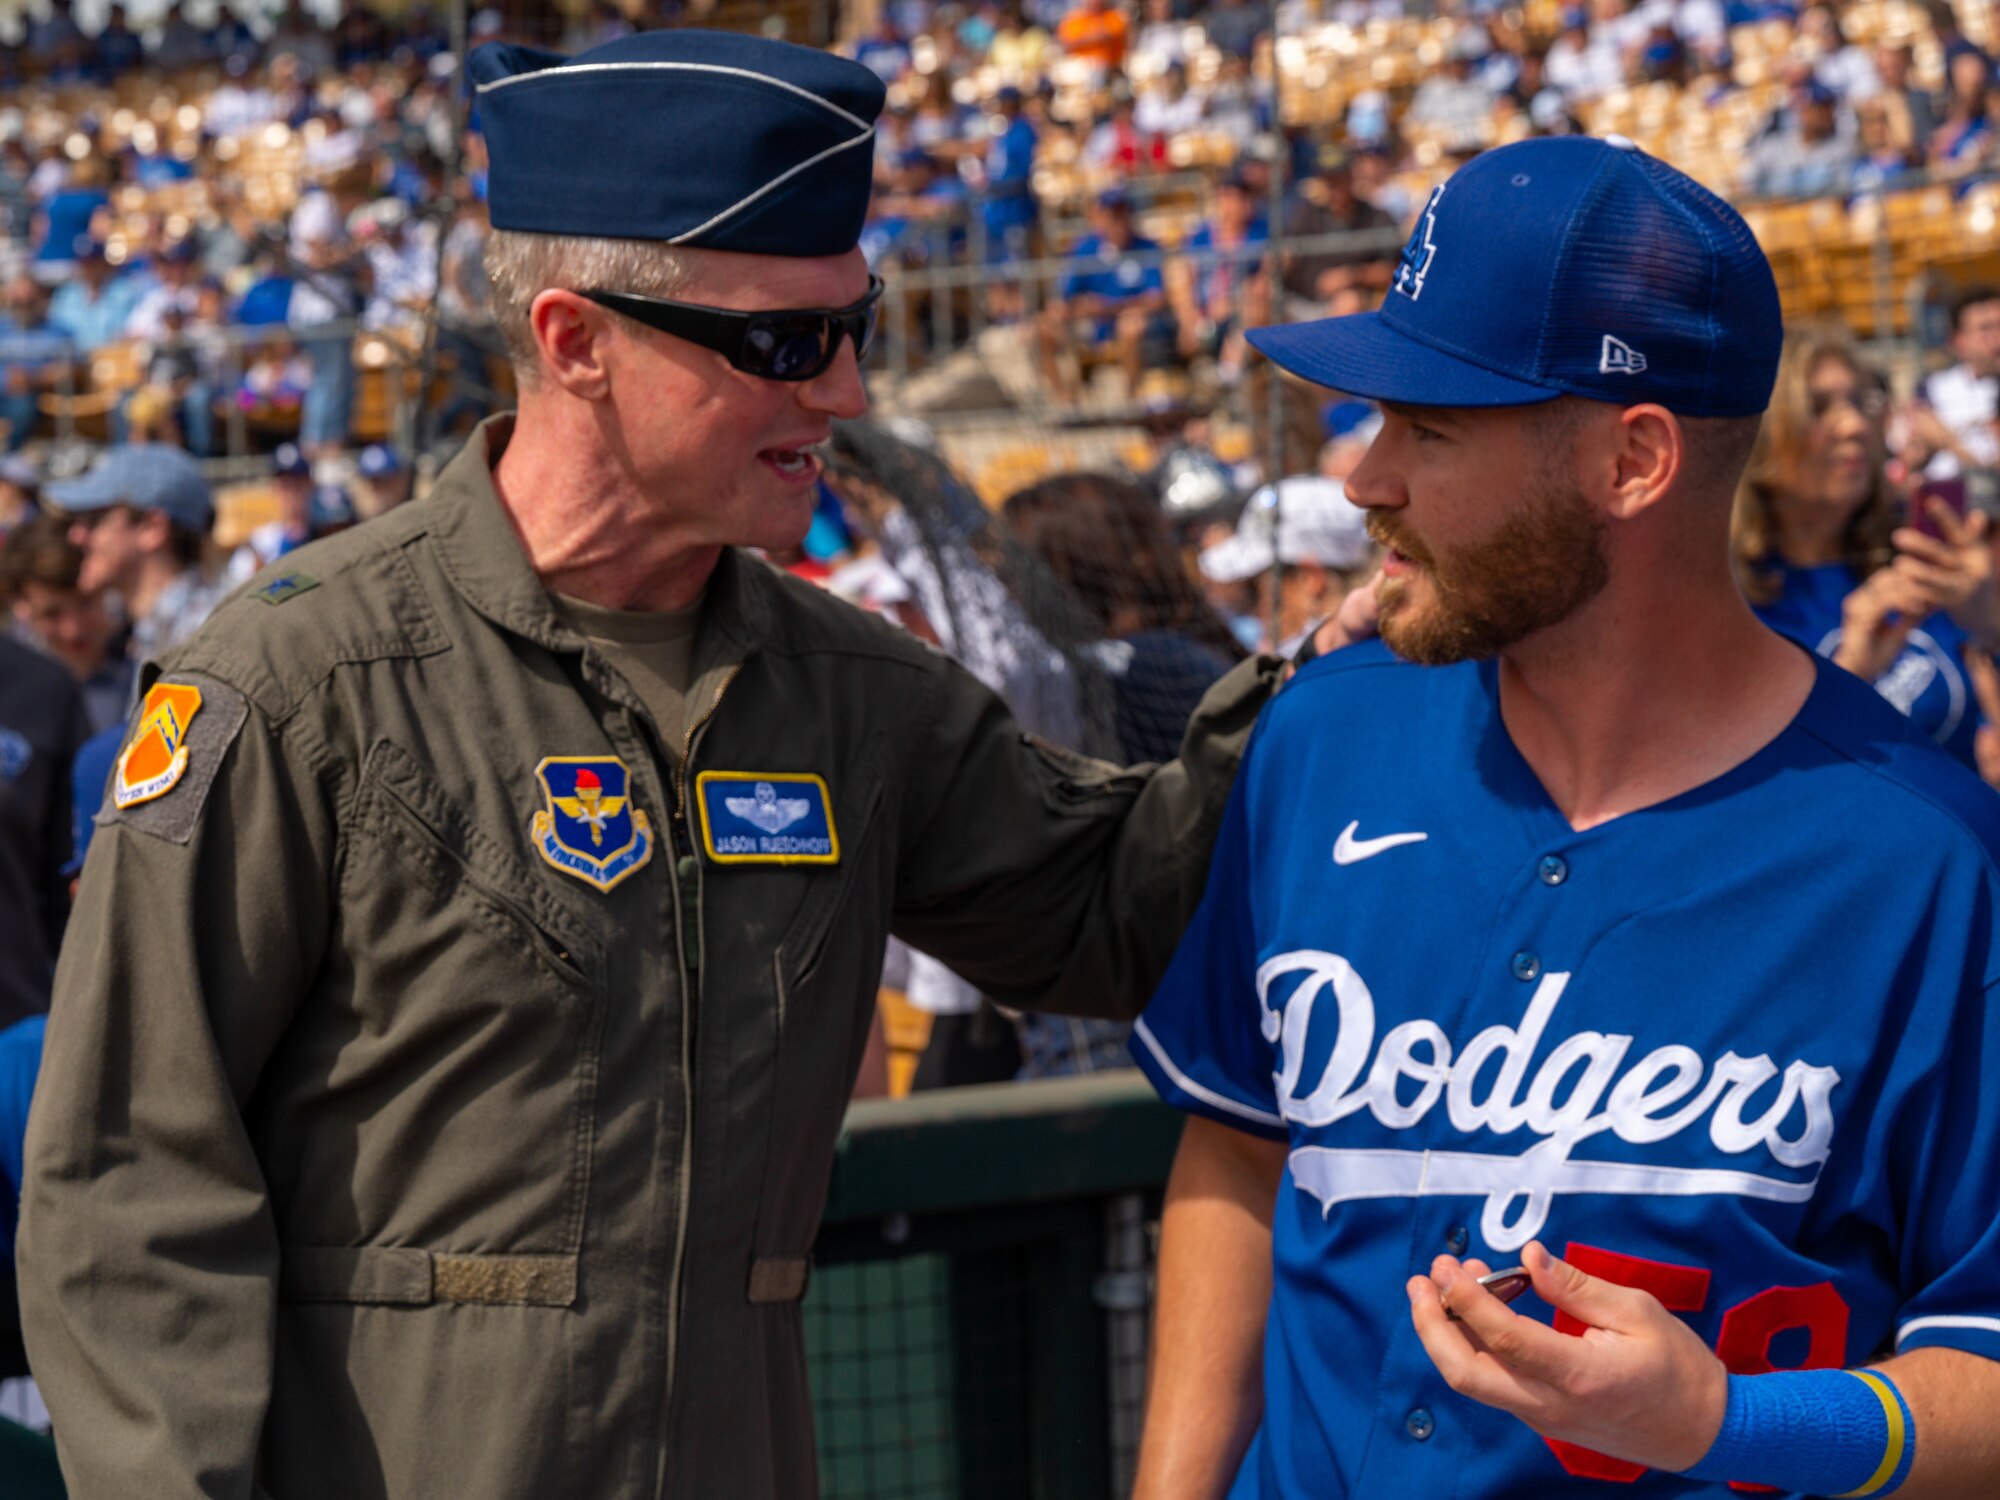 U.S. Air Force Brig. Gen. Jason Rueschhoff, 56th Fighter Wing commander, presents Patrick Mazeika, Los Angeles Dodgers catcher, with a coin March 5, 2023, at Camelback Ranch, Glendale, Arizona.